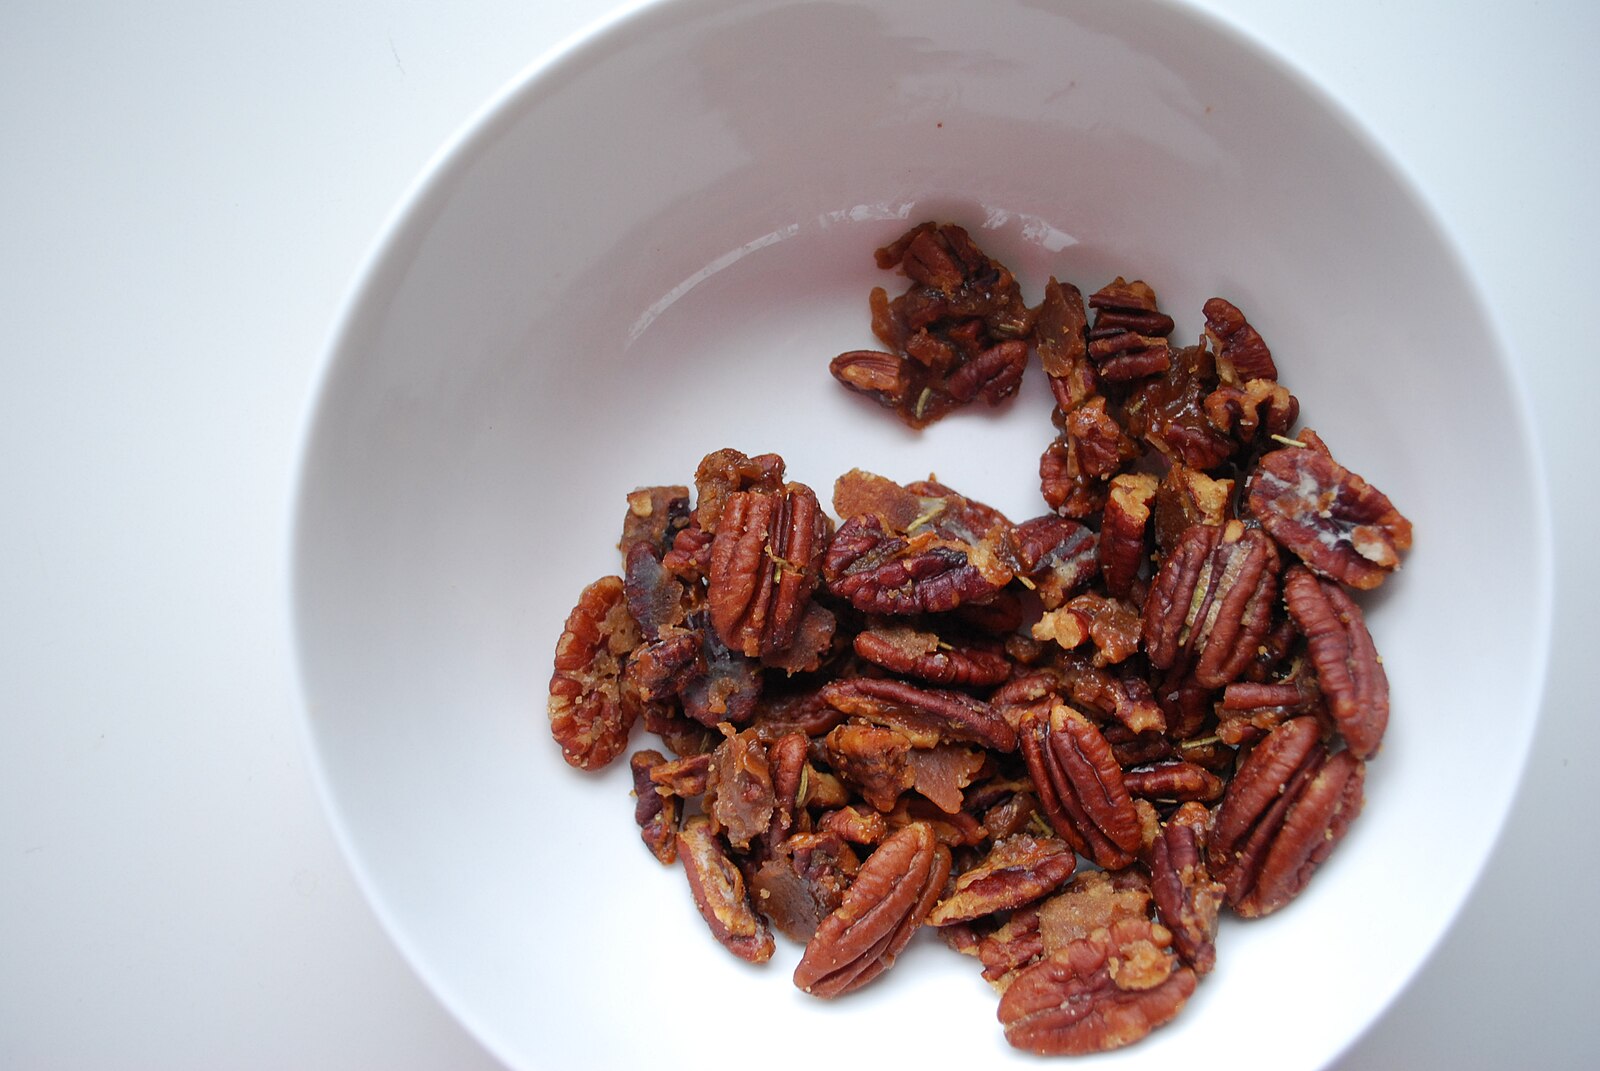 Rosemary candied nuts